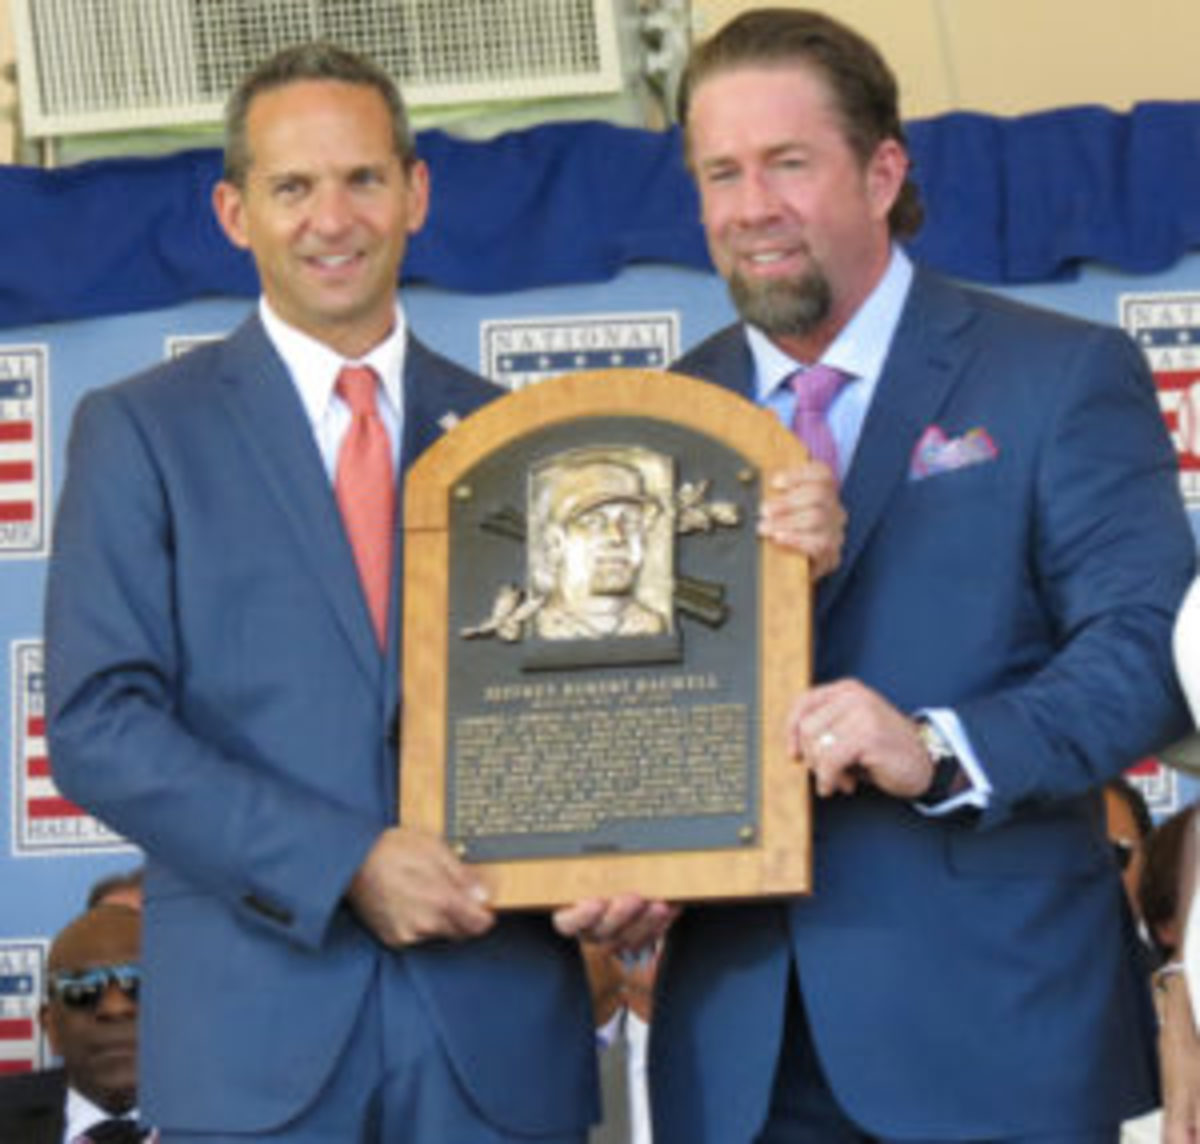  Jeff Bagwell (right) receives his Hall of Fame plaque after being inducted into the Baseball Hall of Fame. (David Moriah photos)